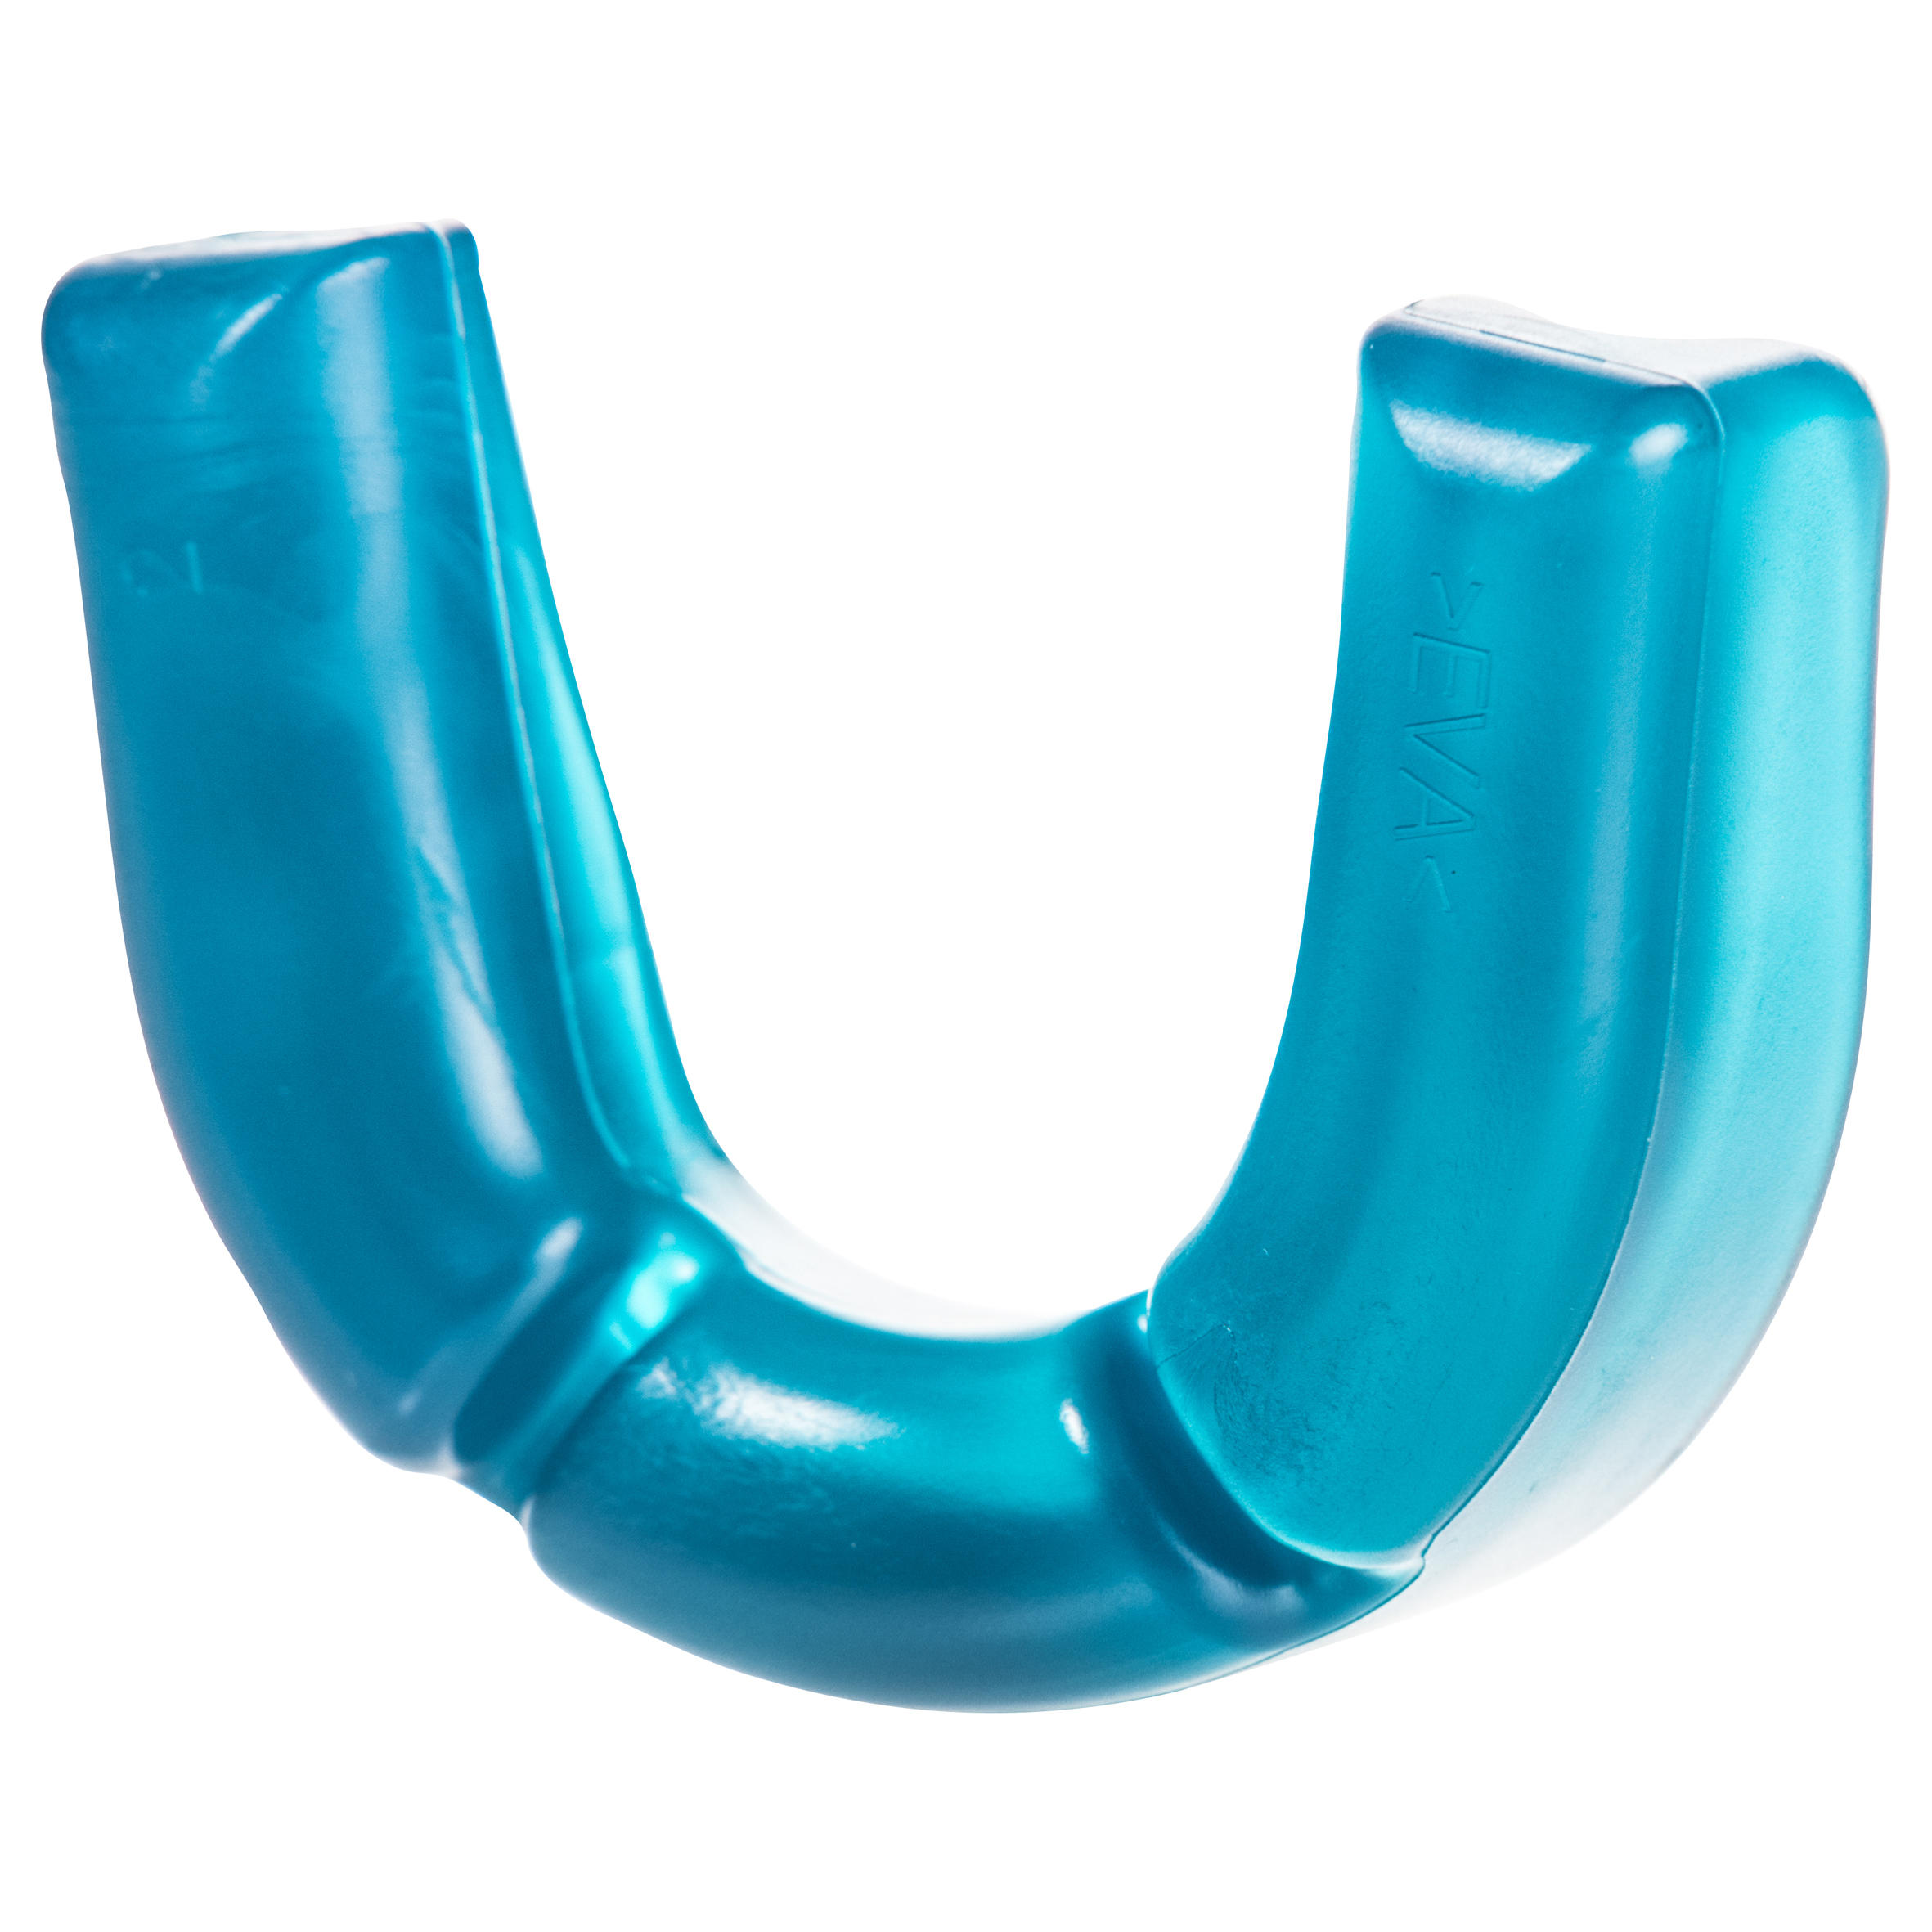 FH100 Adult Large Low-Intensity Field Hockey Mouthguard - Turquoise 5/9